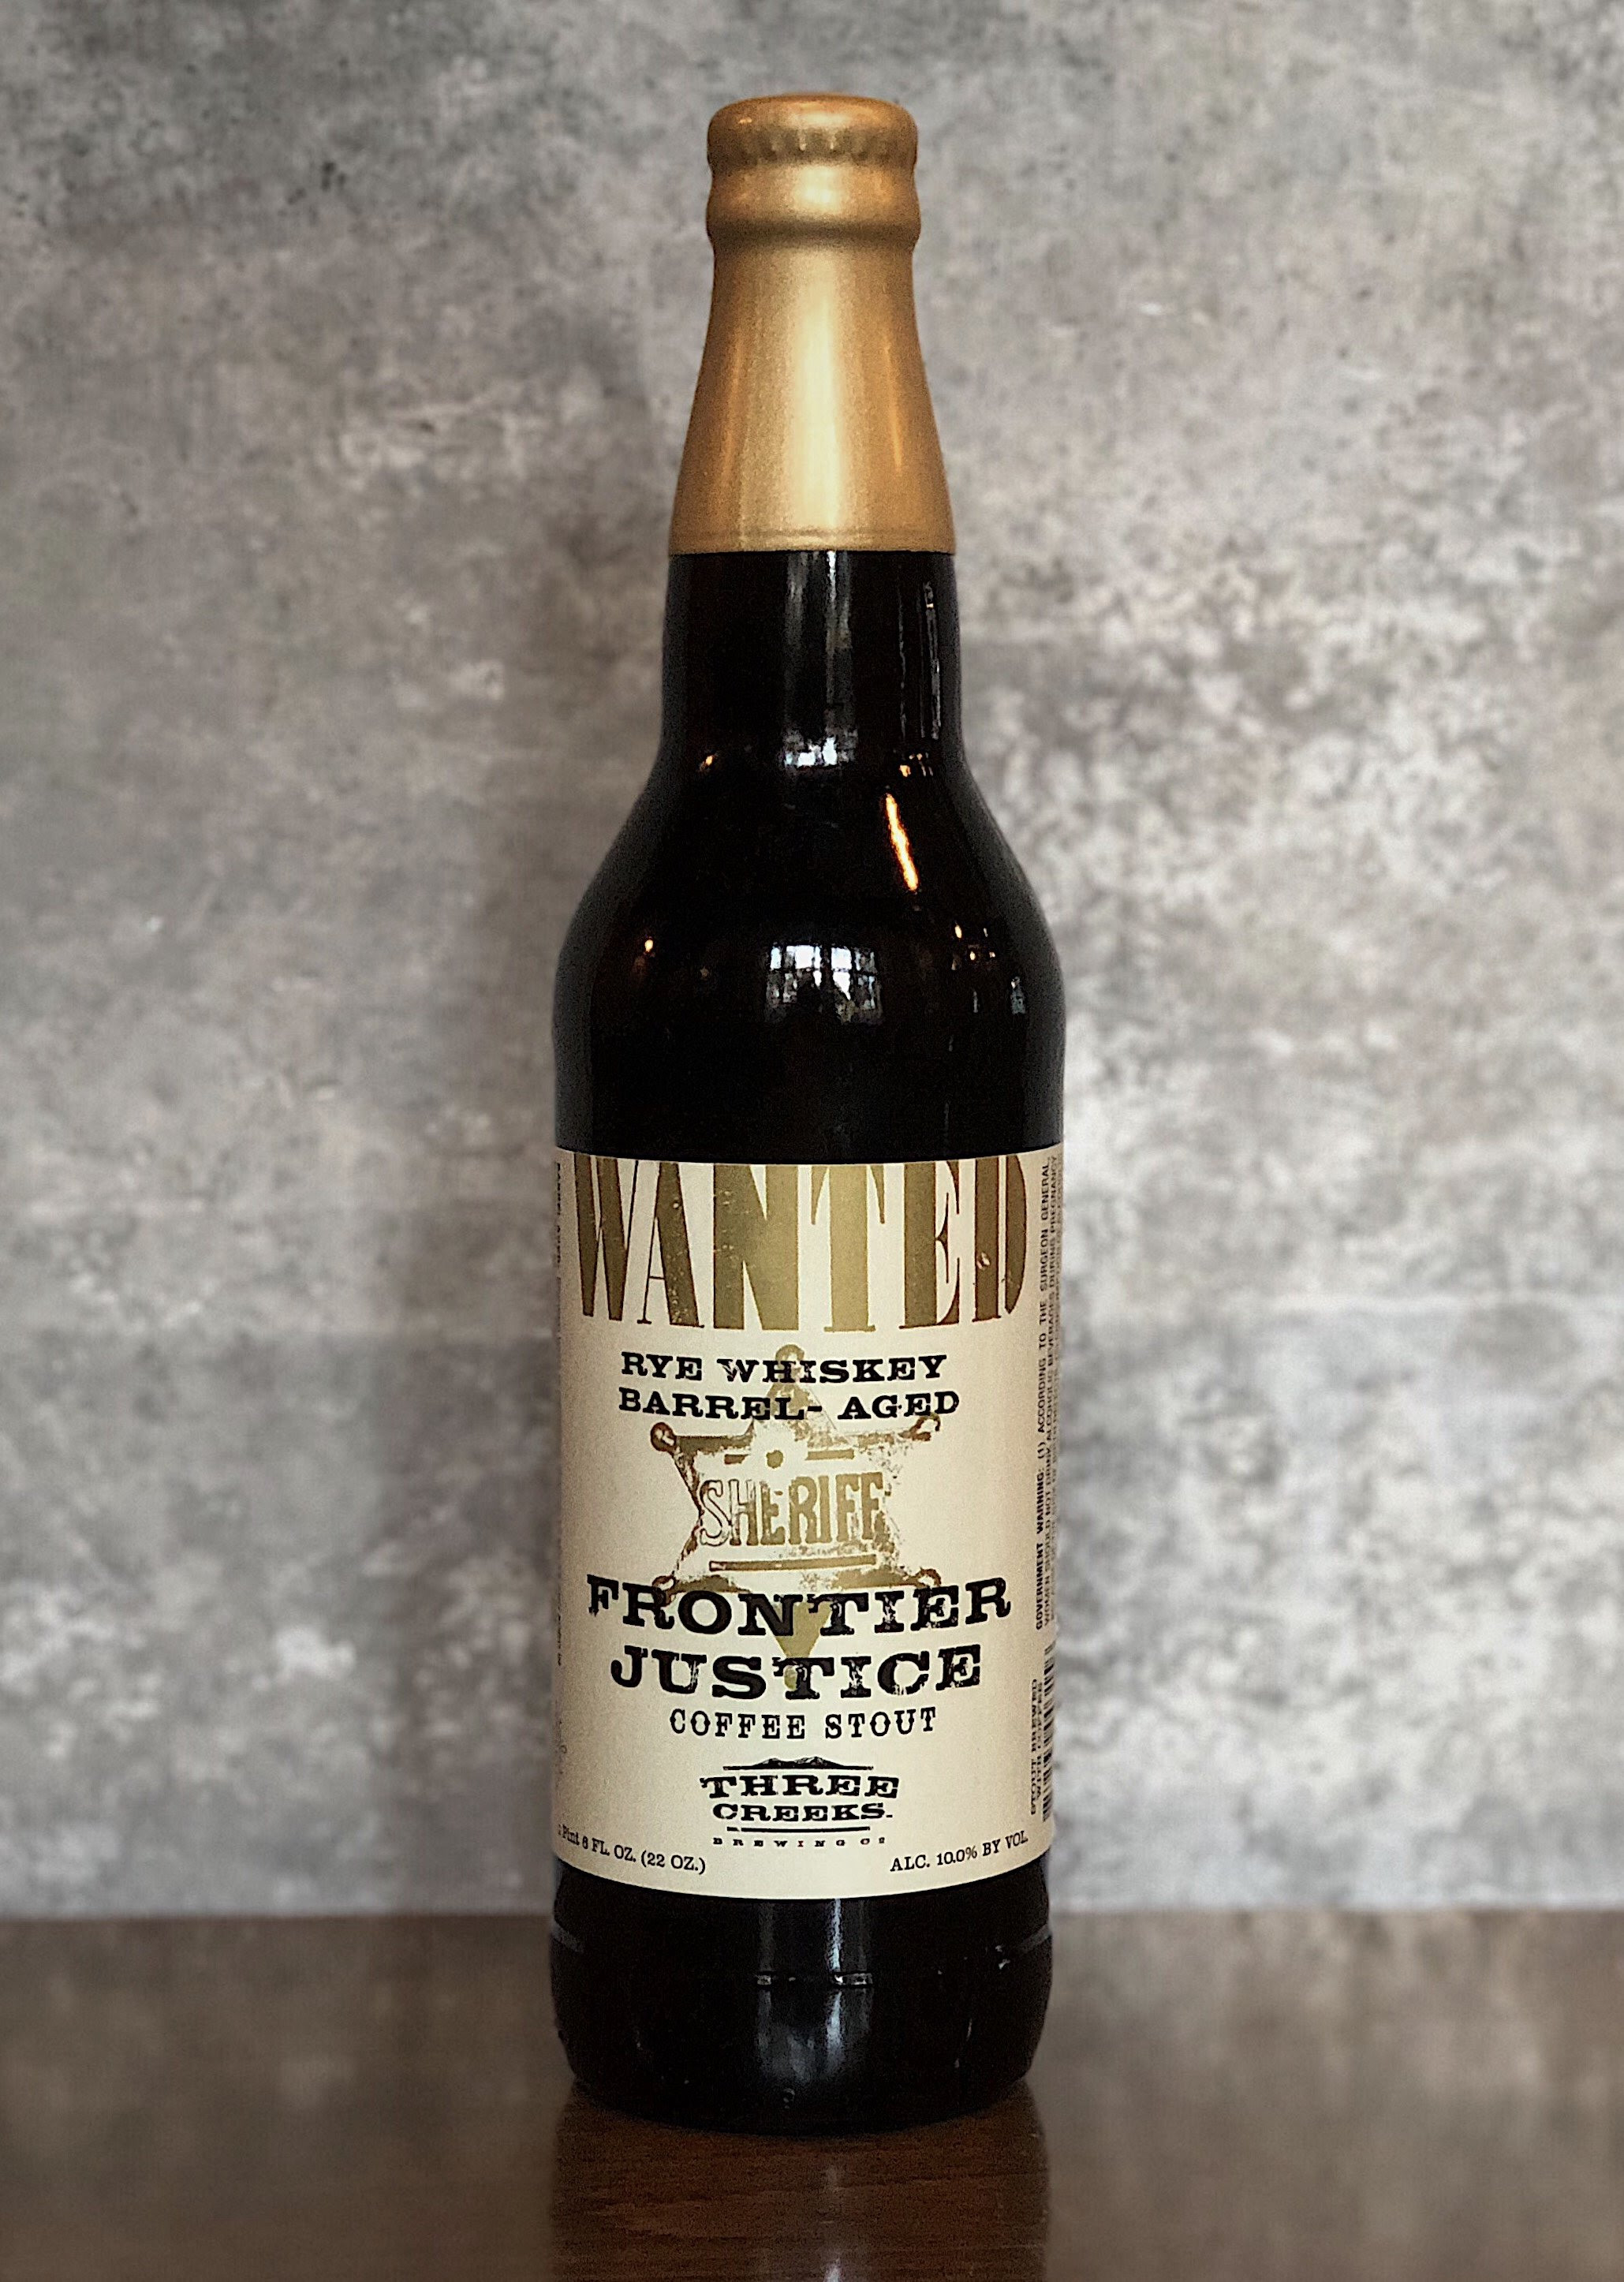 image of Rye Whiskey Barrel - Aged Frontier Justice Coffee Stout courtesy of Three Creeks Brewing